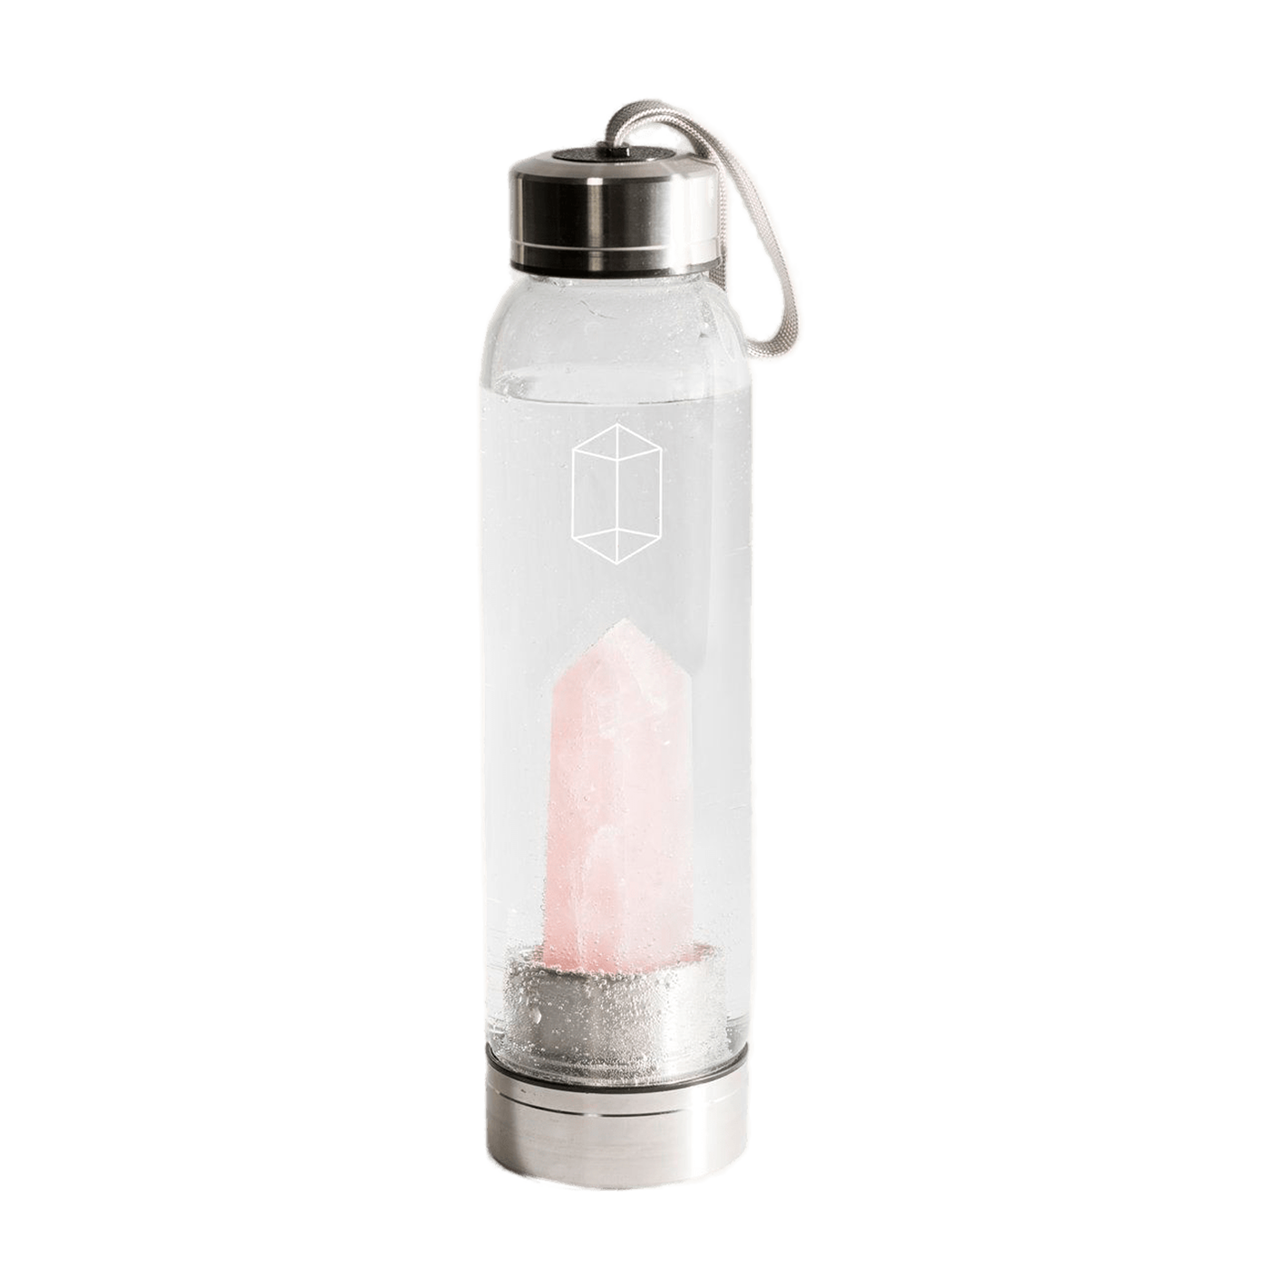 https://vogue.ph/wp-content/uploads/2022/08/Most-Stylish-Water-Bottles_0001_Stylish-Water-Bottles_0005_rose_water_1512x-transformed.png